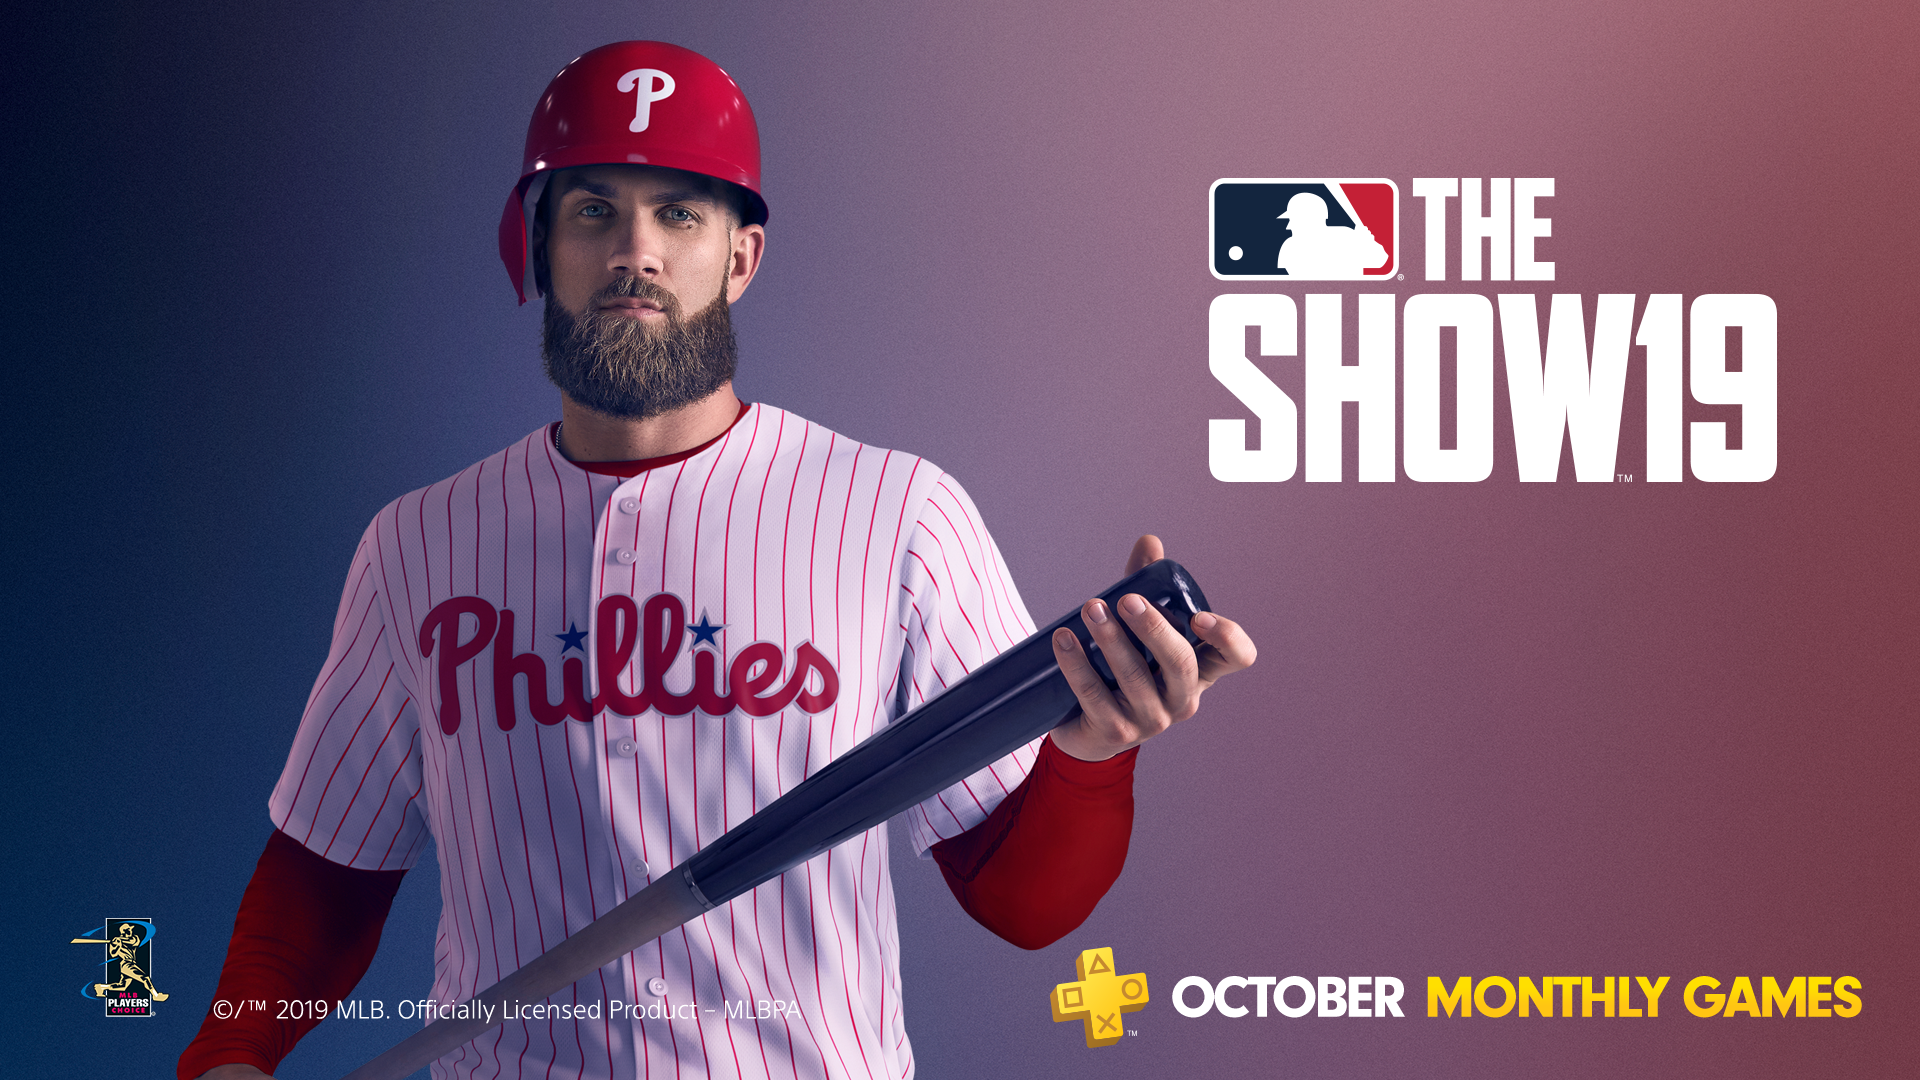 Plus Free Games for October: The Last of Us Remastered, MLB The Show 19 – PlayStation.Blog